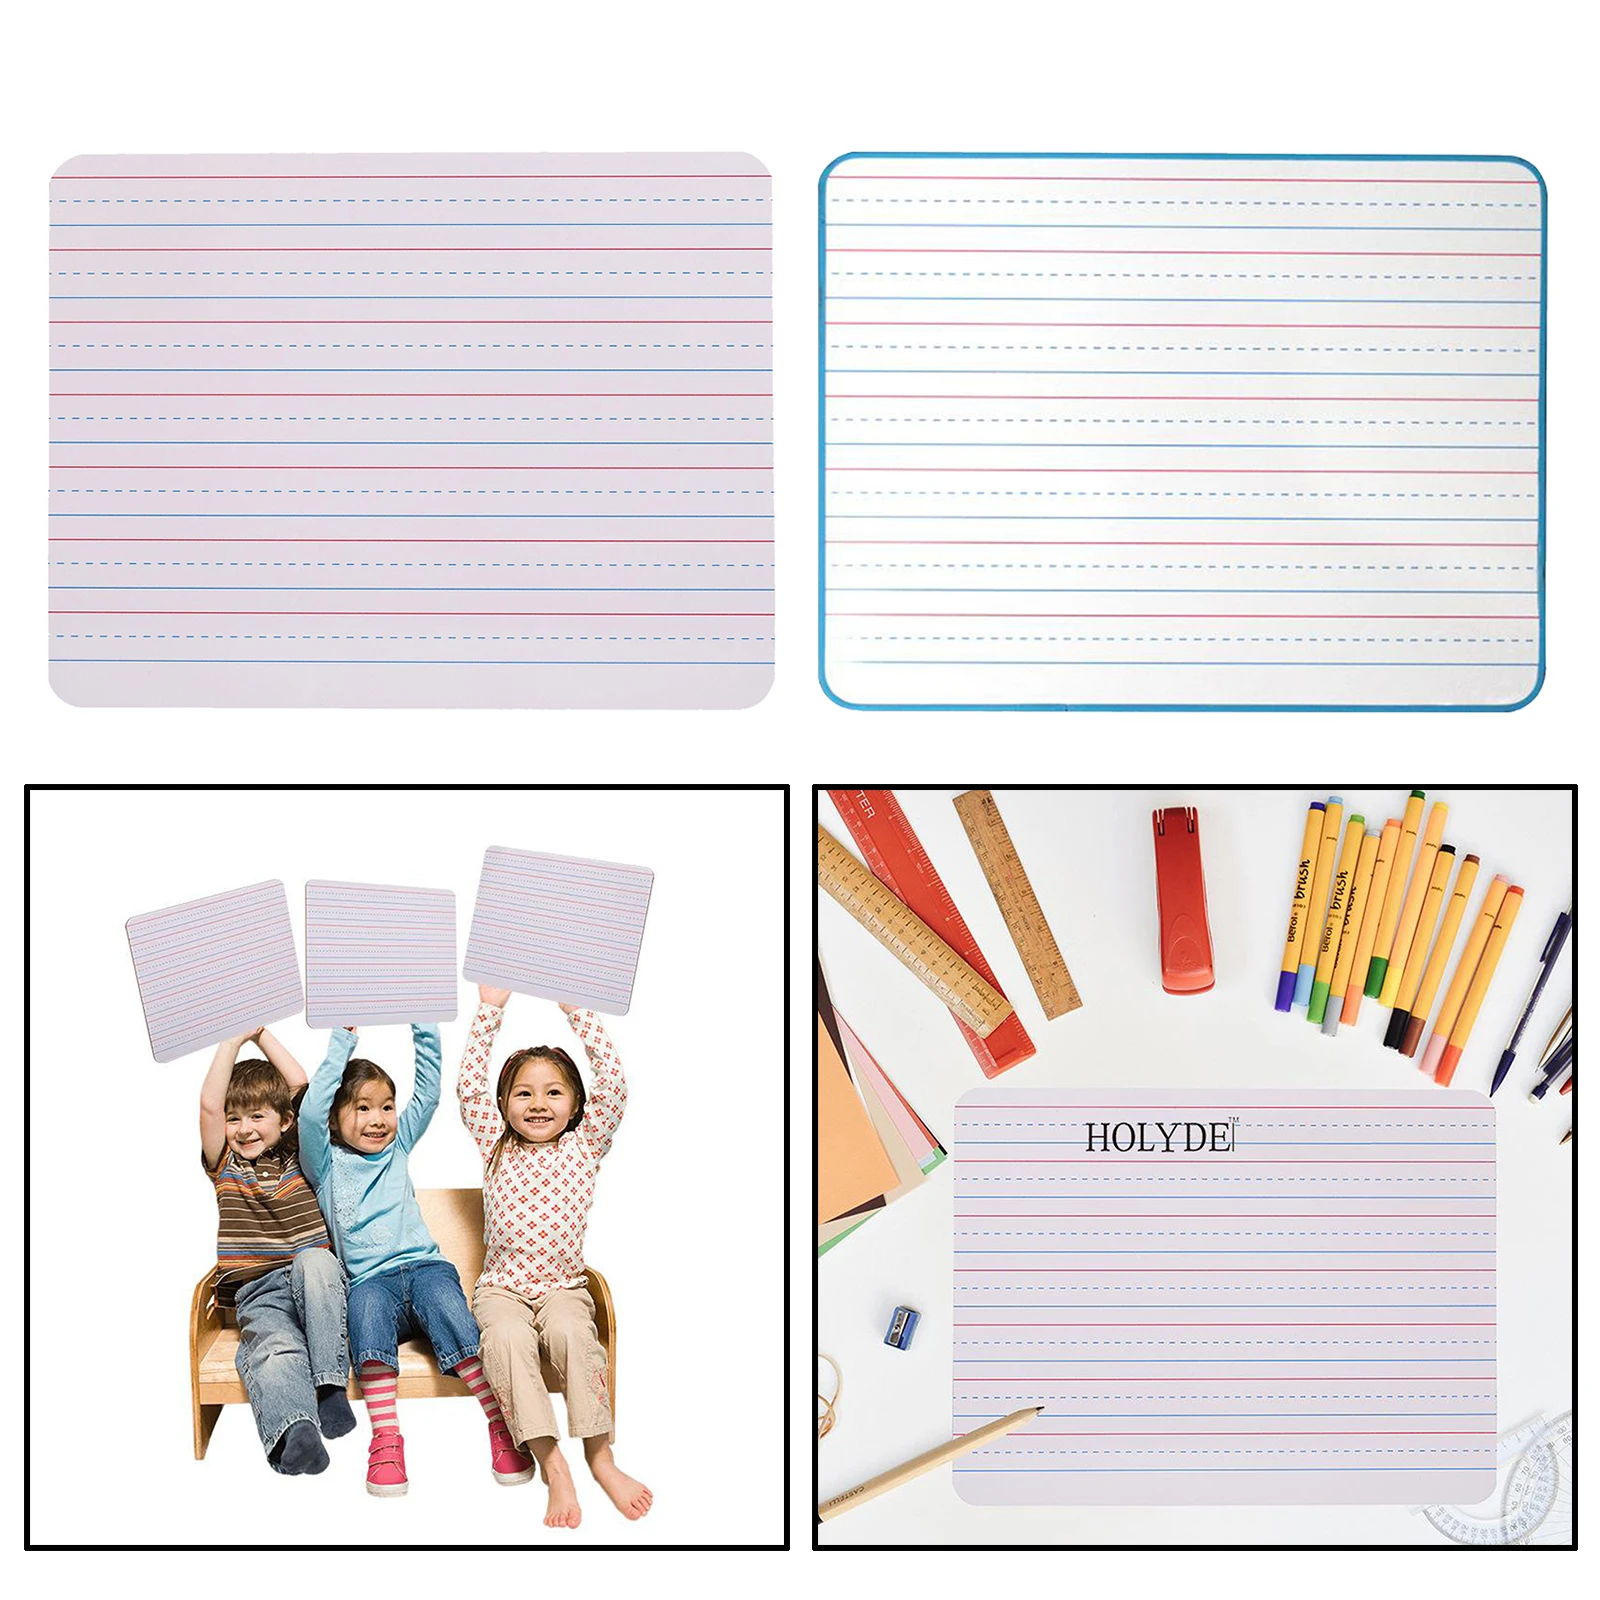 Dry Erase Lapboard Portable Learning Board, Double Sided, Lined/Plain Writeboard Mini Lapboards for Students 9x12 inches